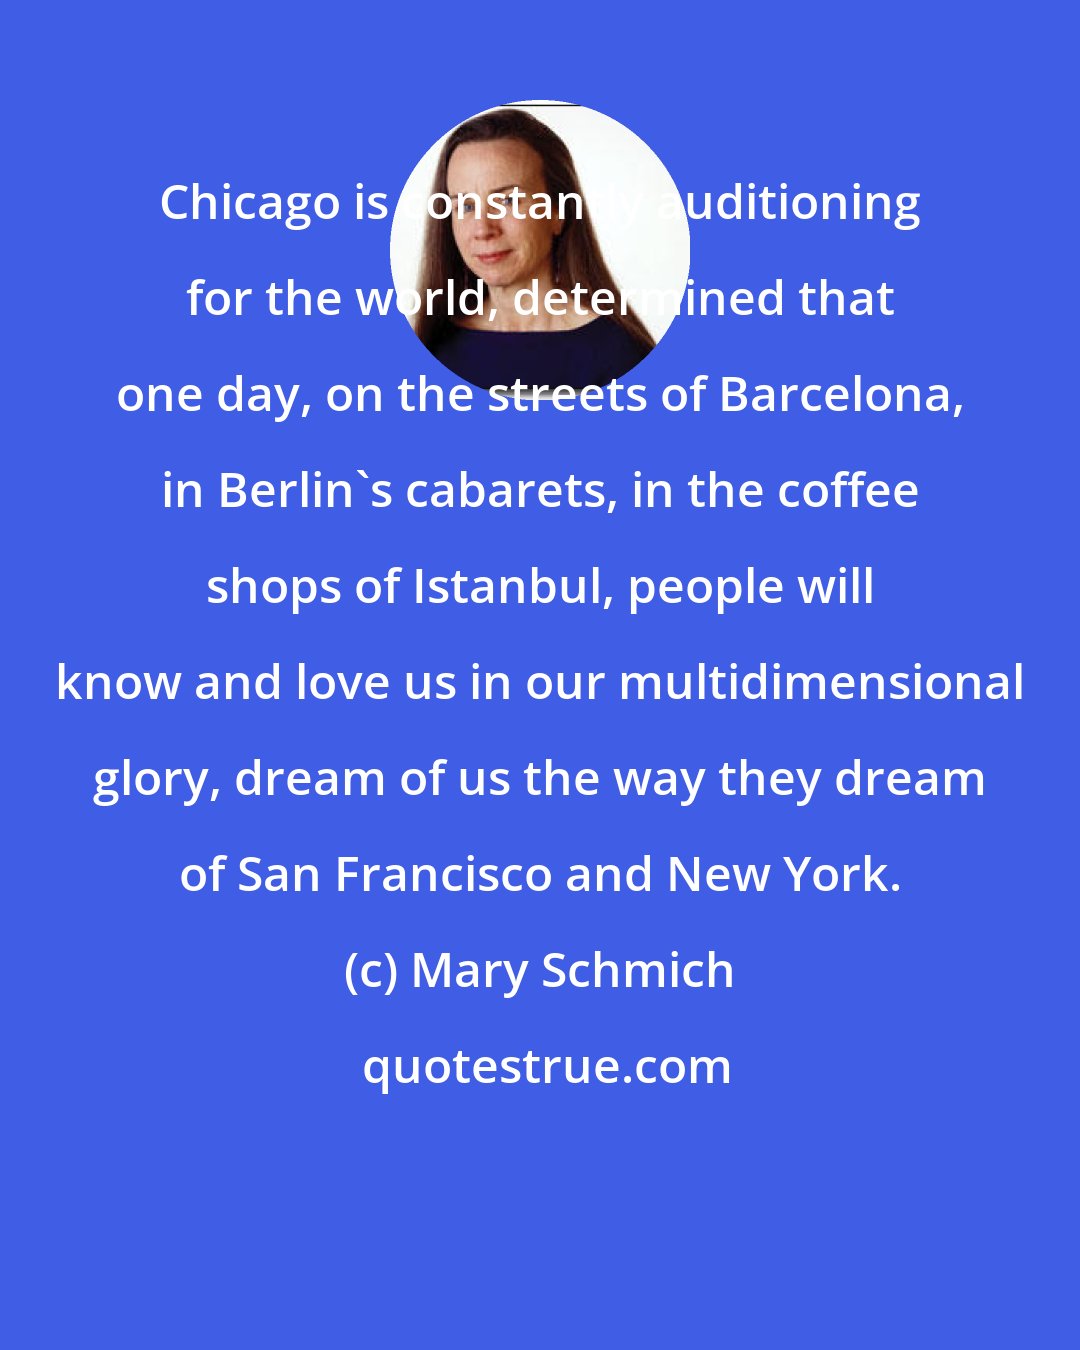 Mary Schmich: Chicago is constantly auditioning for the world, determined that one day, on the streets of Barcelona, in Berlin's cabarets, in the coffee shops of Istanbul, people will know and love us in our multidimensional glory, dream of us the way they dream of San Francisco and New York.